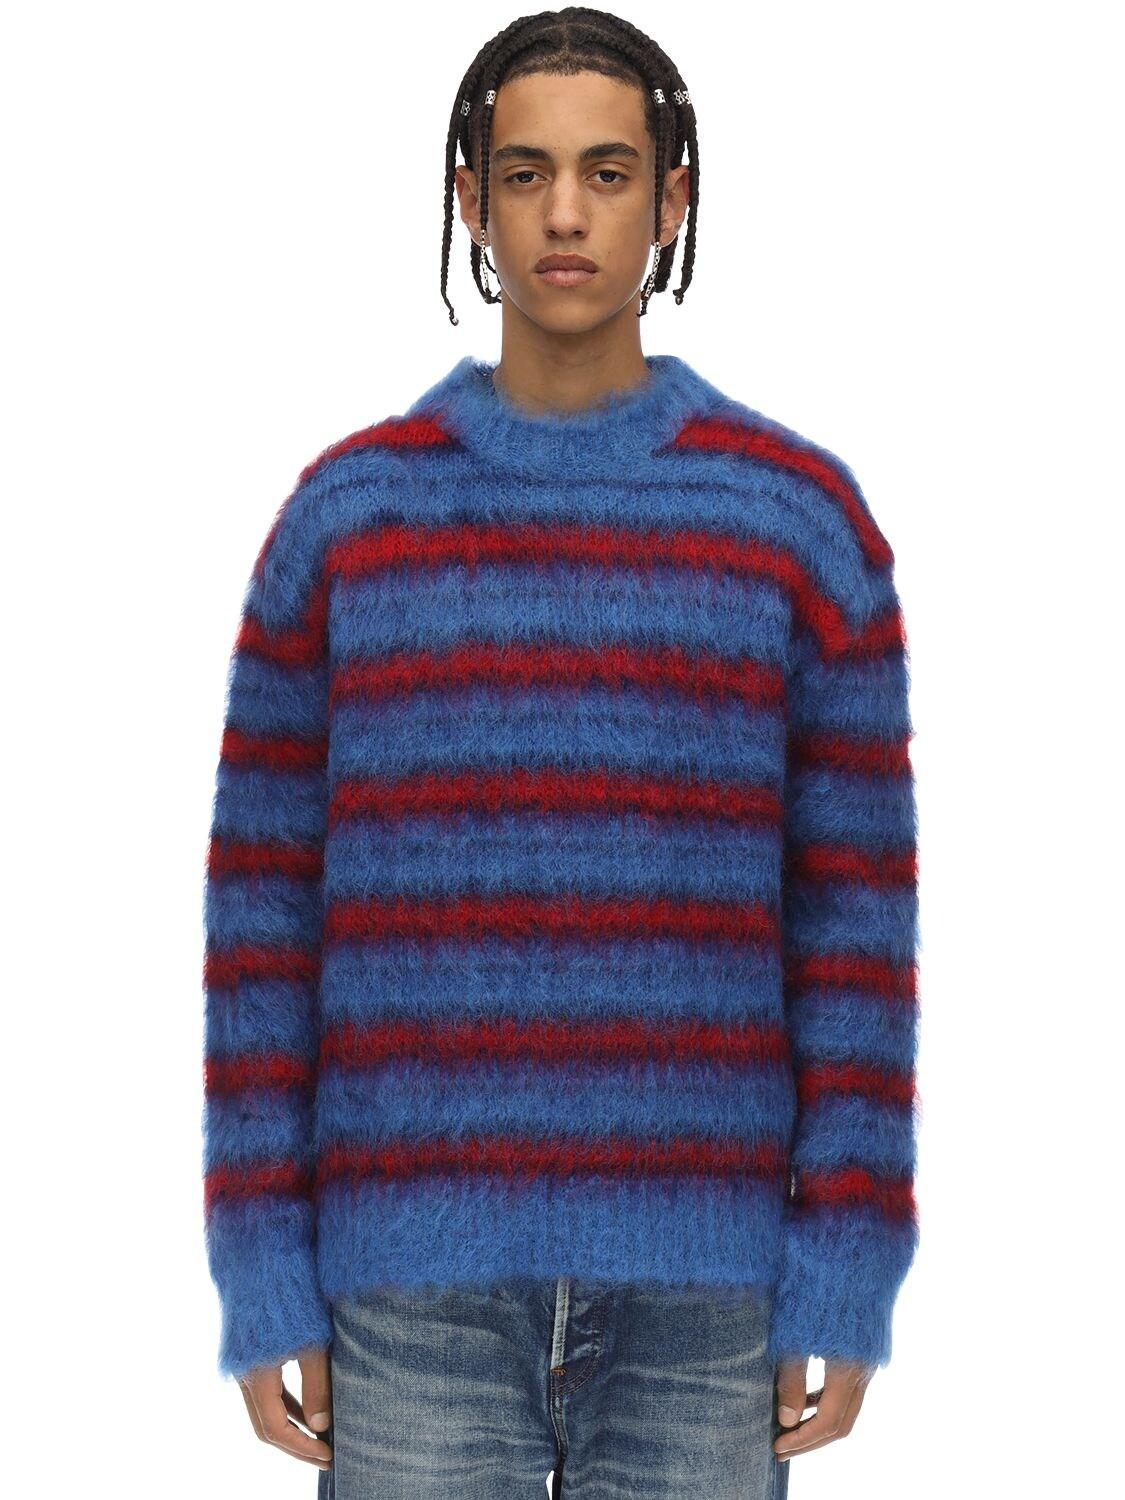 Marni Synthetic Striped Mohair Blend Knit Sweater in Blue/Red 